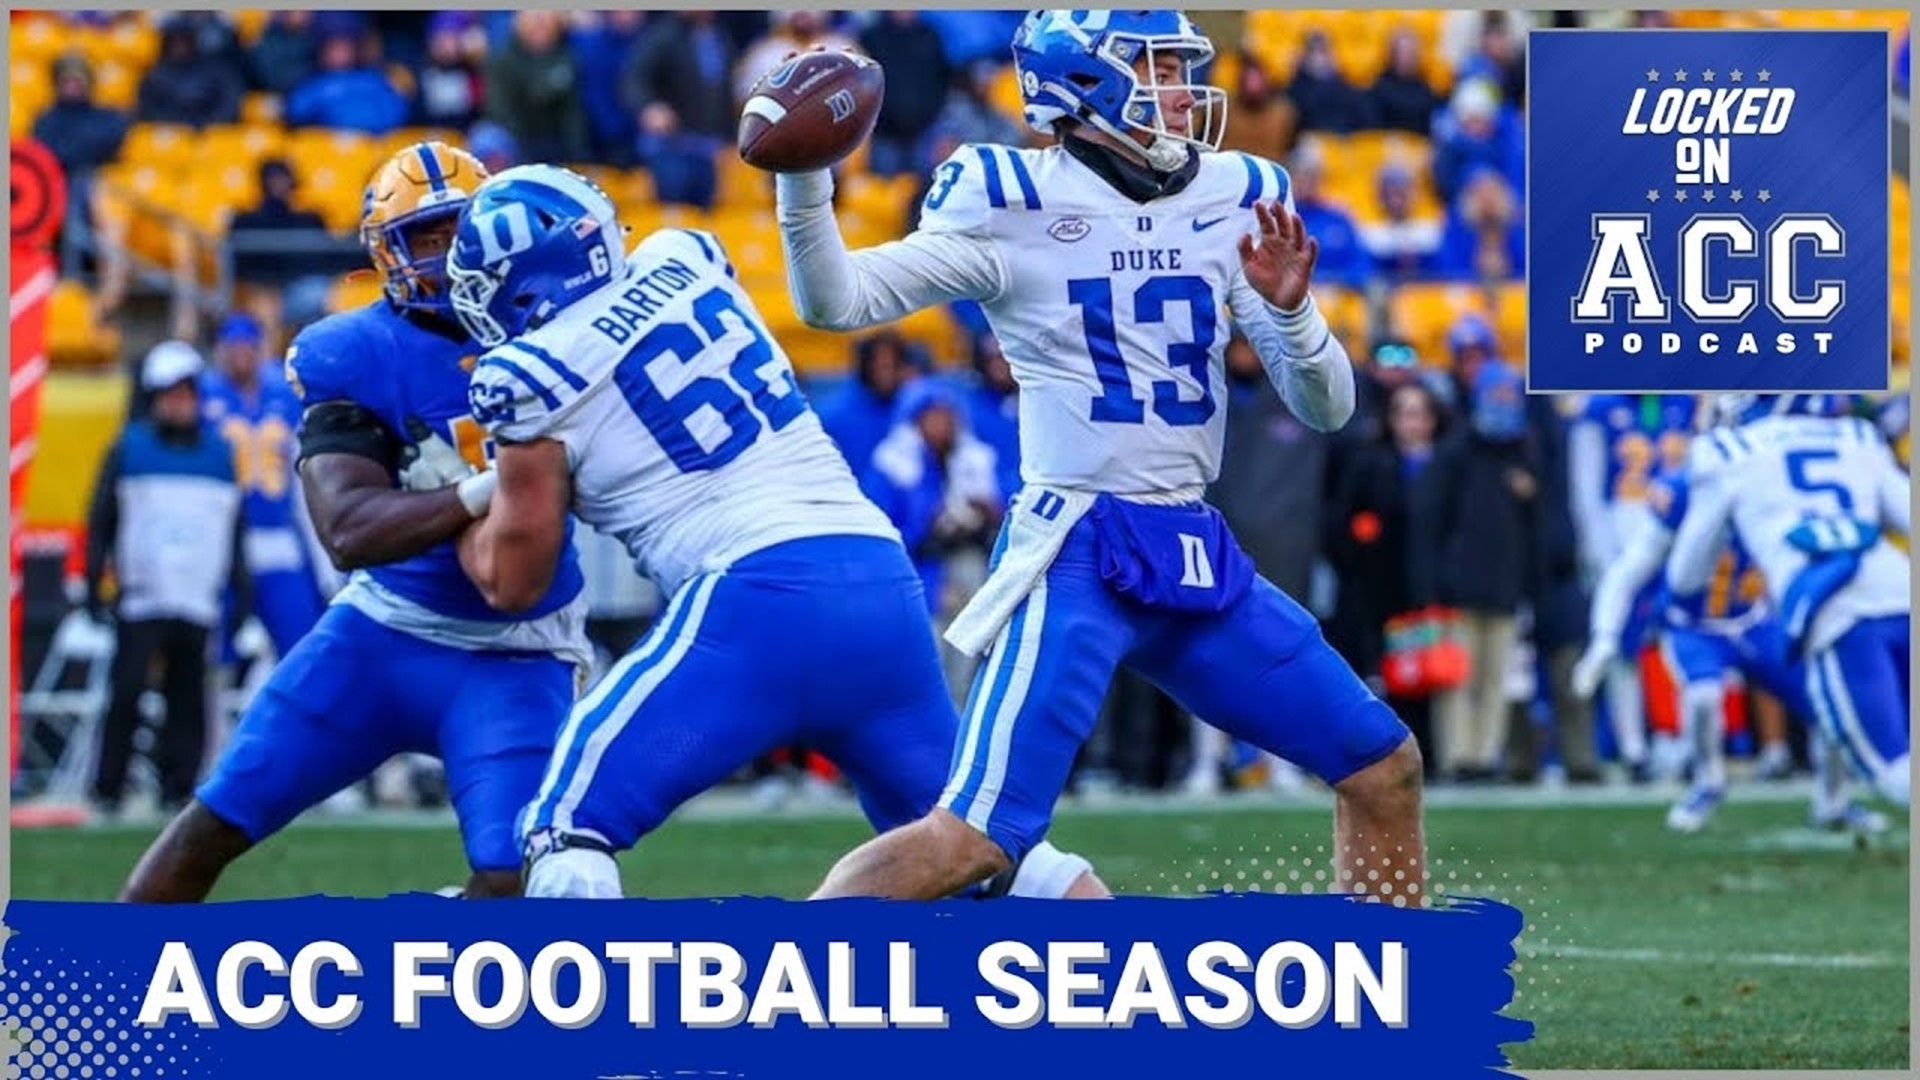 Duke has much to prove this season while Clemson looks to get back into the National conversation around who is the best team in college football.